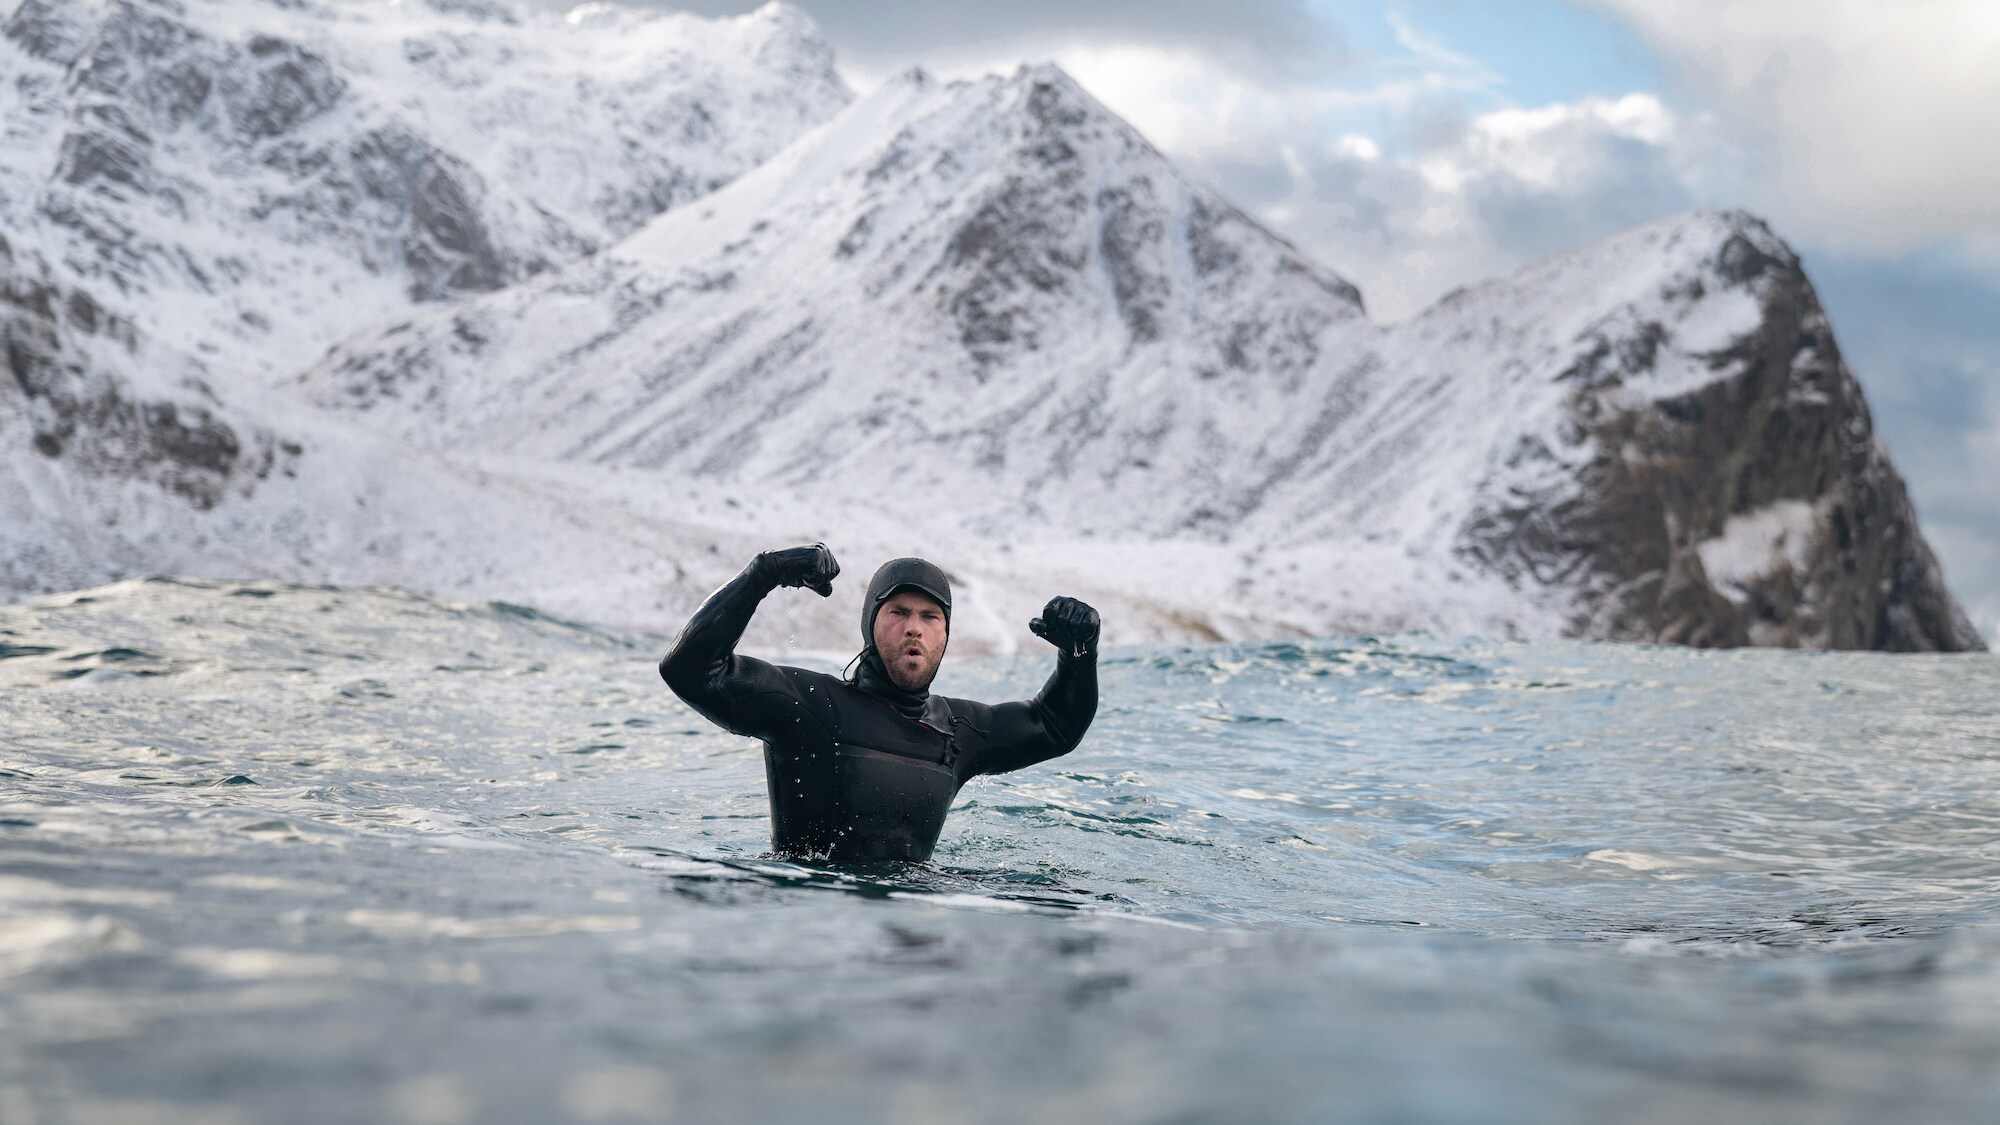 Chris Hemsworth celebrates while surfing. (National Geographic for Disney+/Craig Parry)